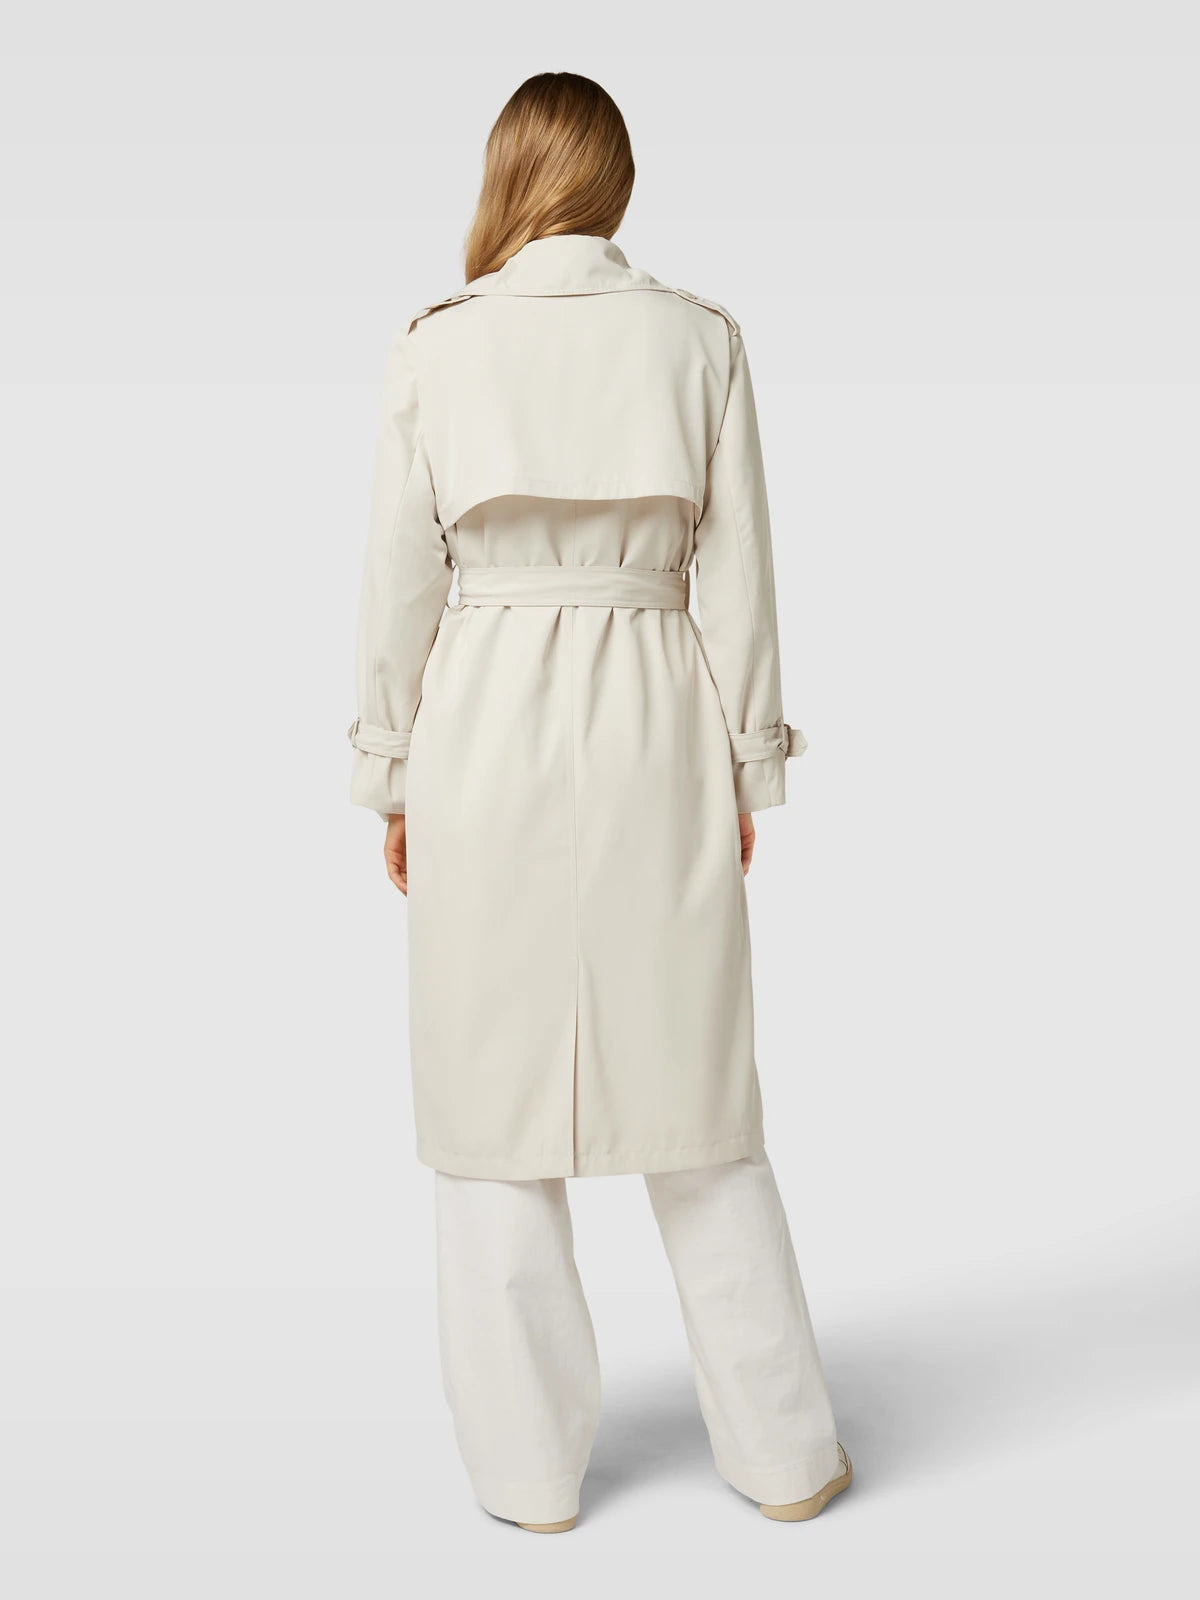 Trench coat (sustainable)